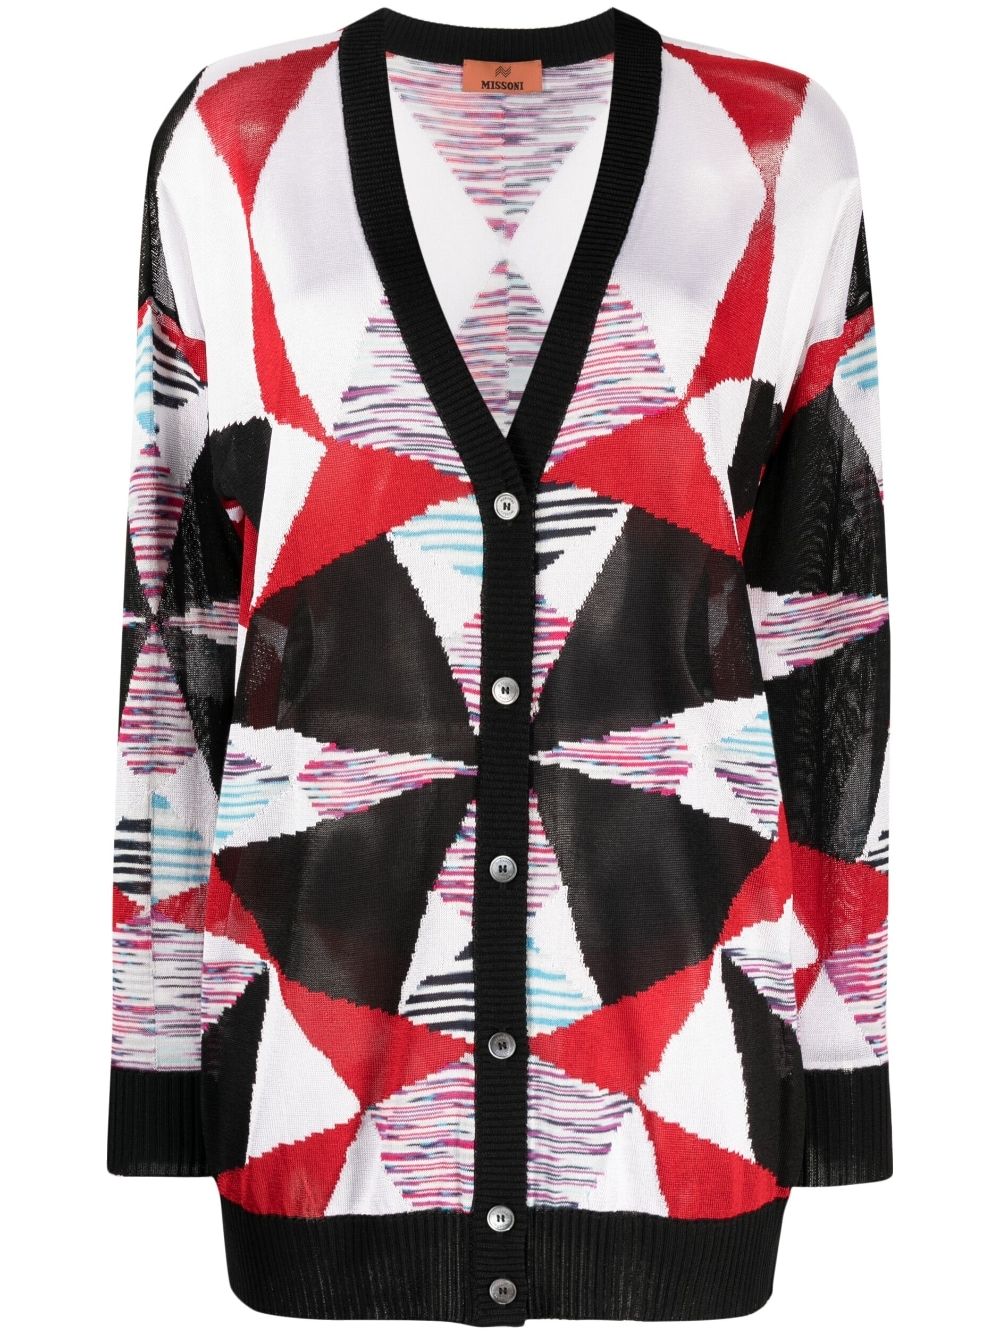 MISSONI Boldly Sophisticated Intarsia Knit Cardigan - SS23